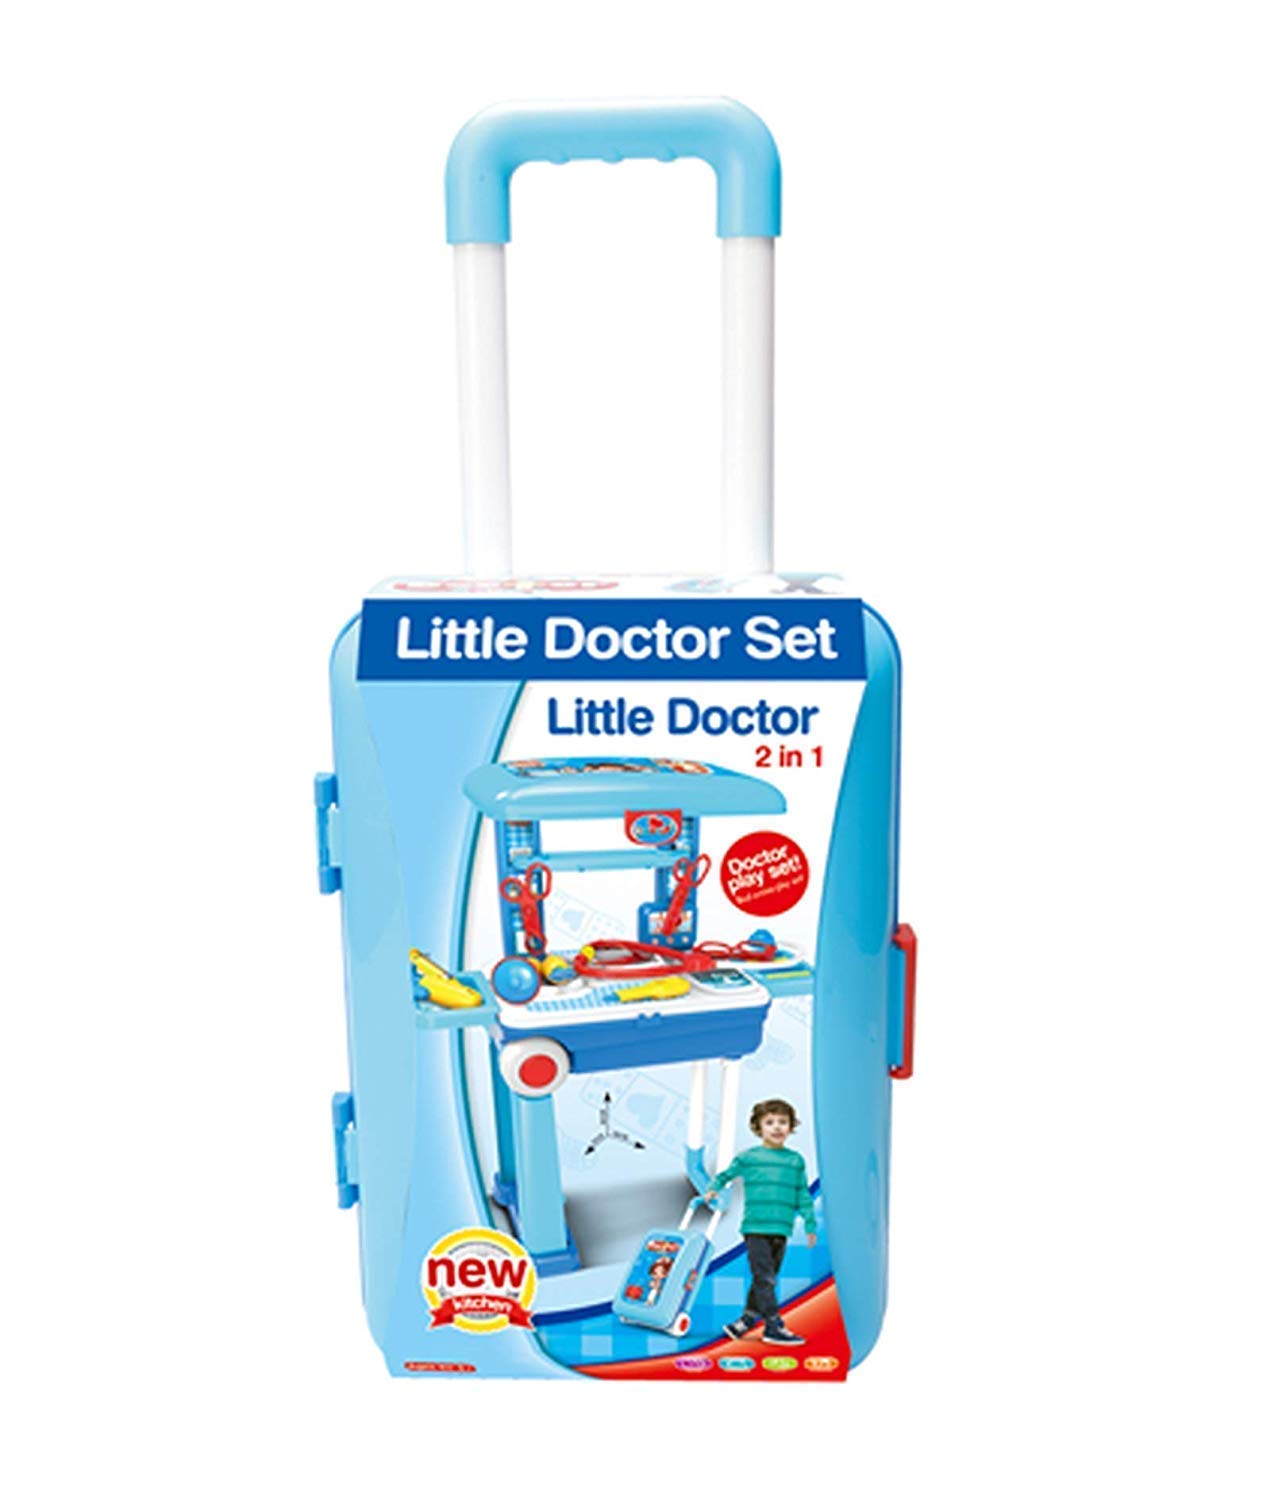 Funrally® Little Doctor's Bring Along Medical Clinic Suitcase 2in1, Doctor Set Play Toy, Role Toy for Kids with Briefcase in a Trolley Equipment Doctors and Foldable with Wheels, Premium Quality